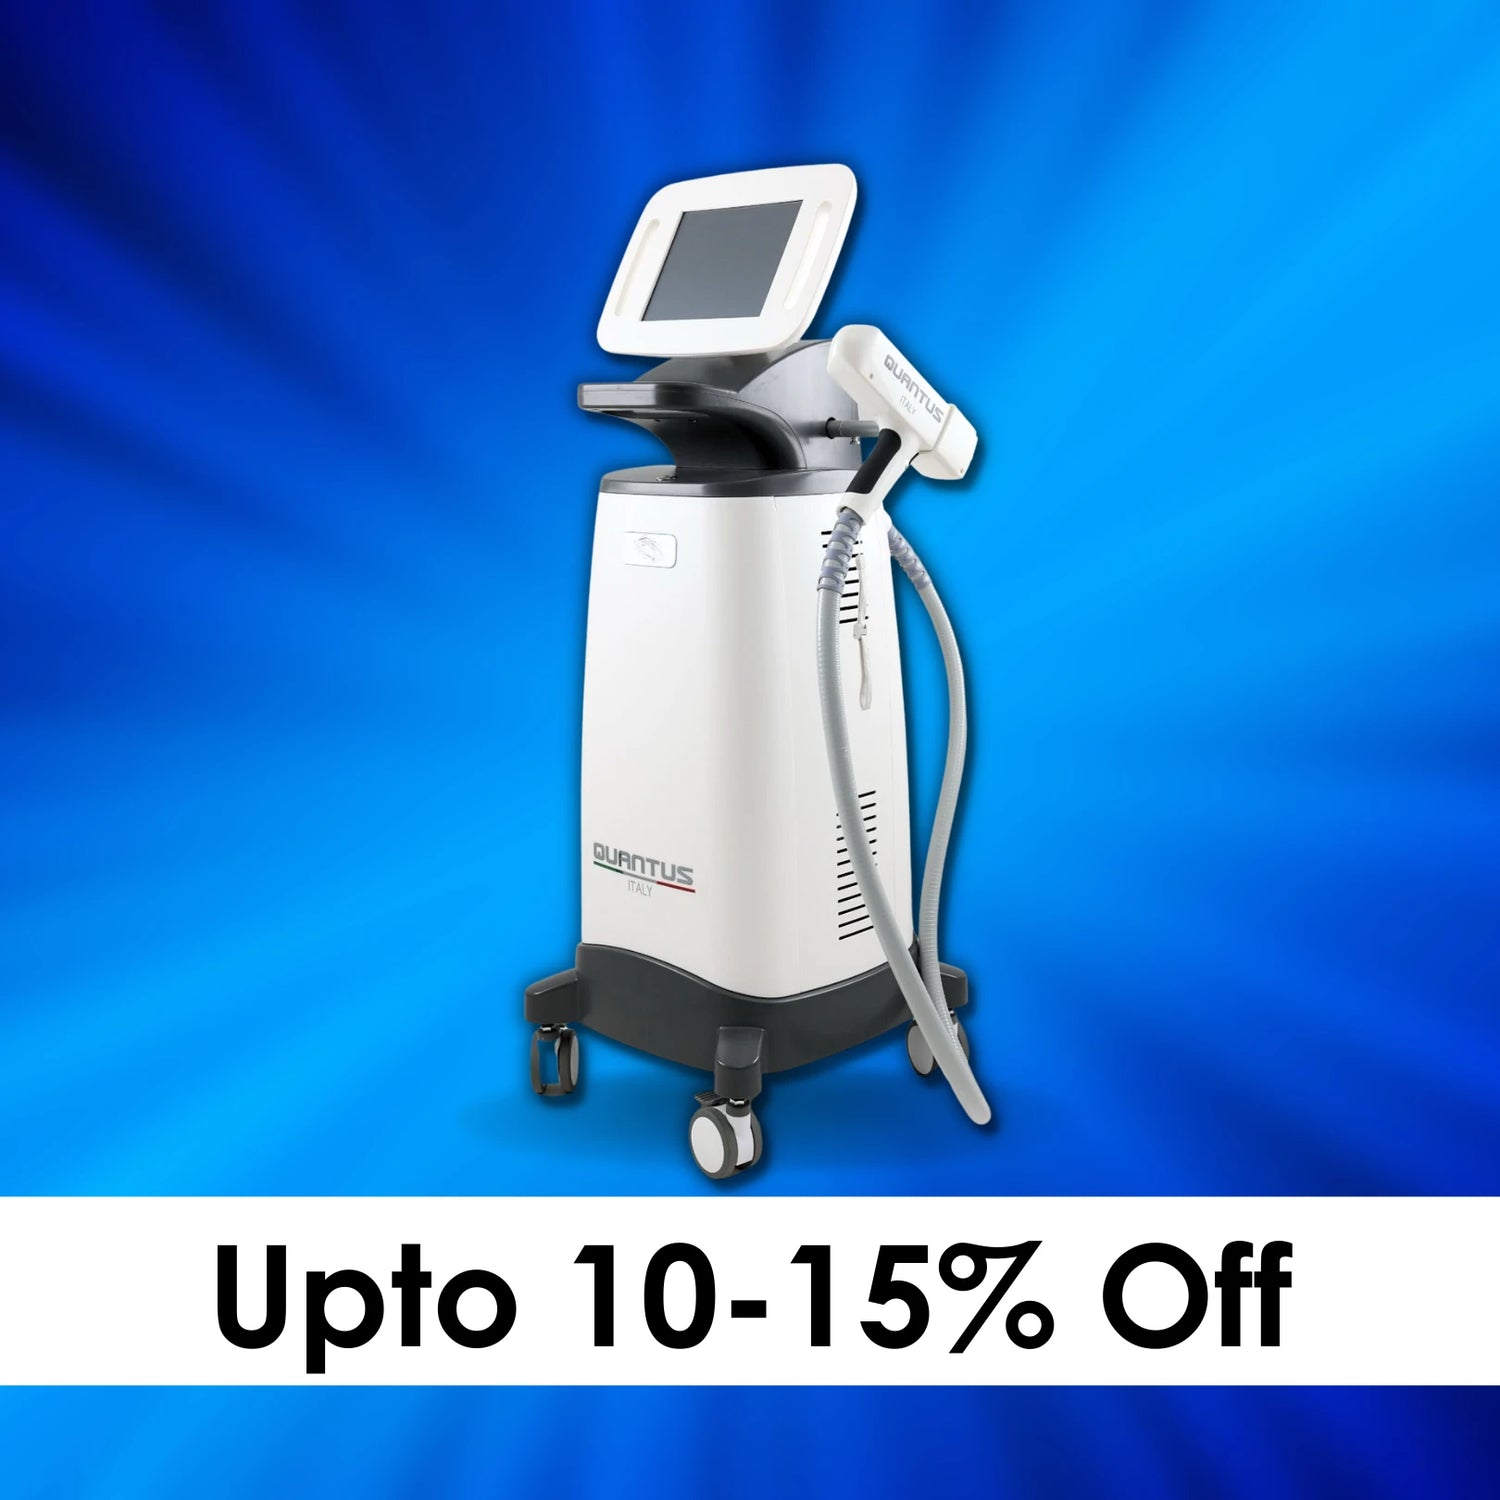 PICO LASER AND TATTOO REMOVAL MACHINES